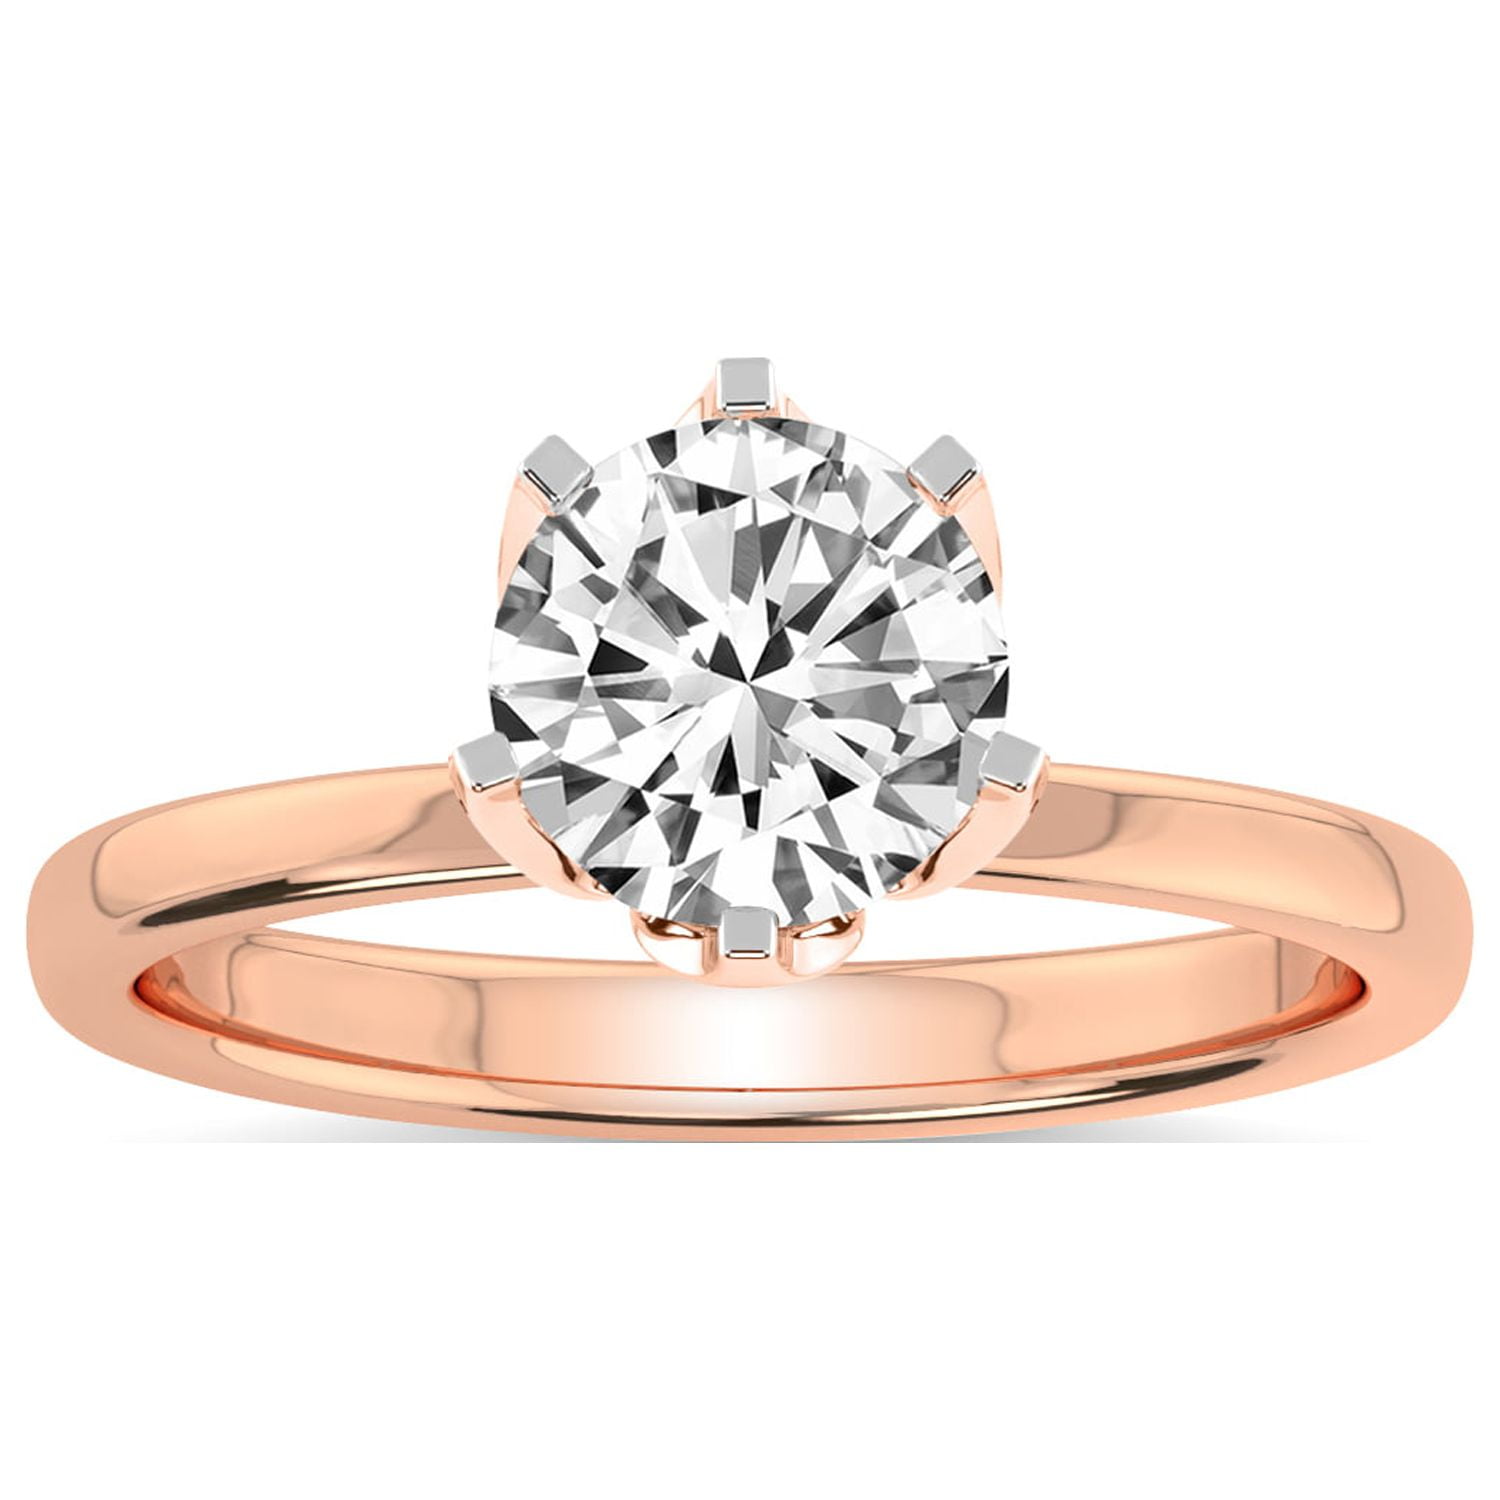 1/3 Ct. Diamond Solitaire Engagement Ring in 14K Rose Gold, Women's, Size: 7, Pink